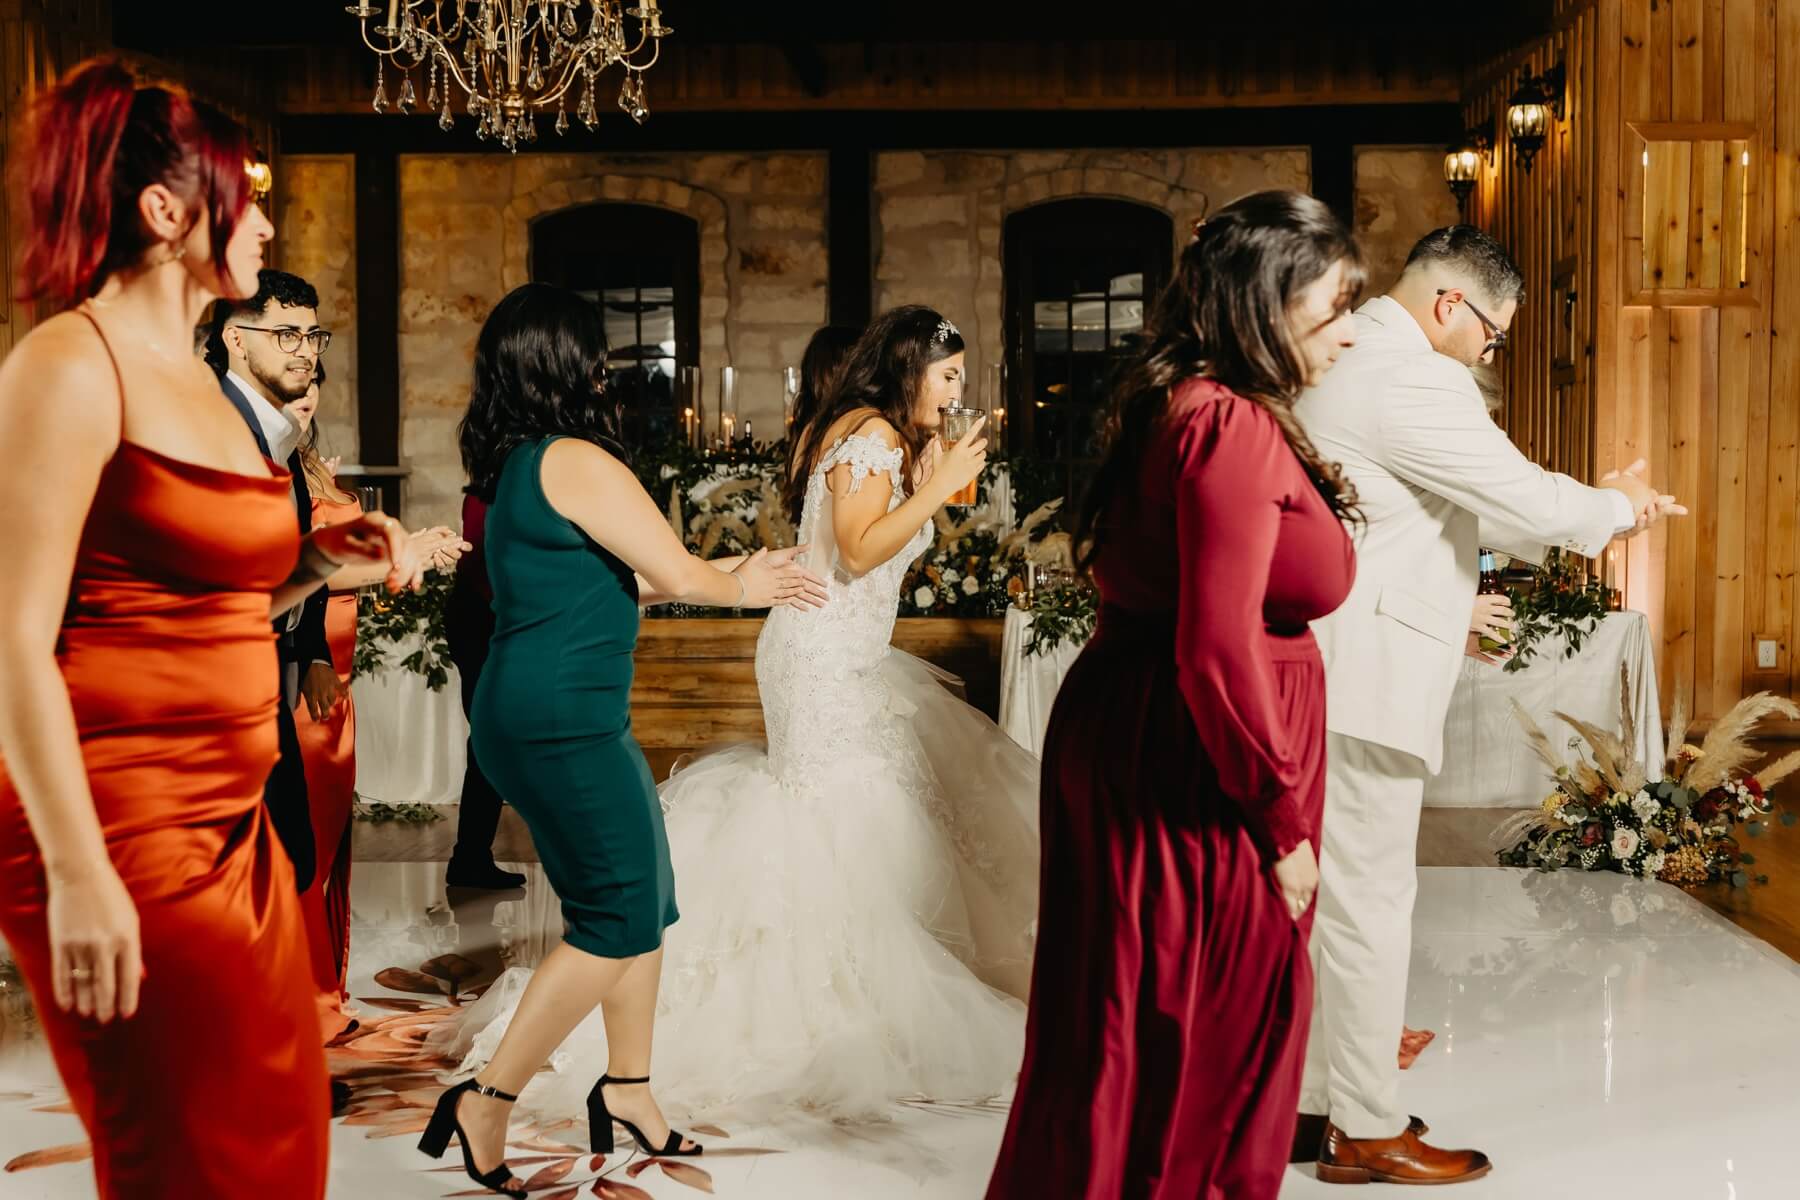 Woman in wedding dress dancing with wedding guests